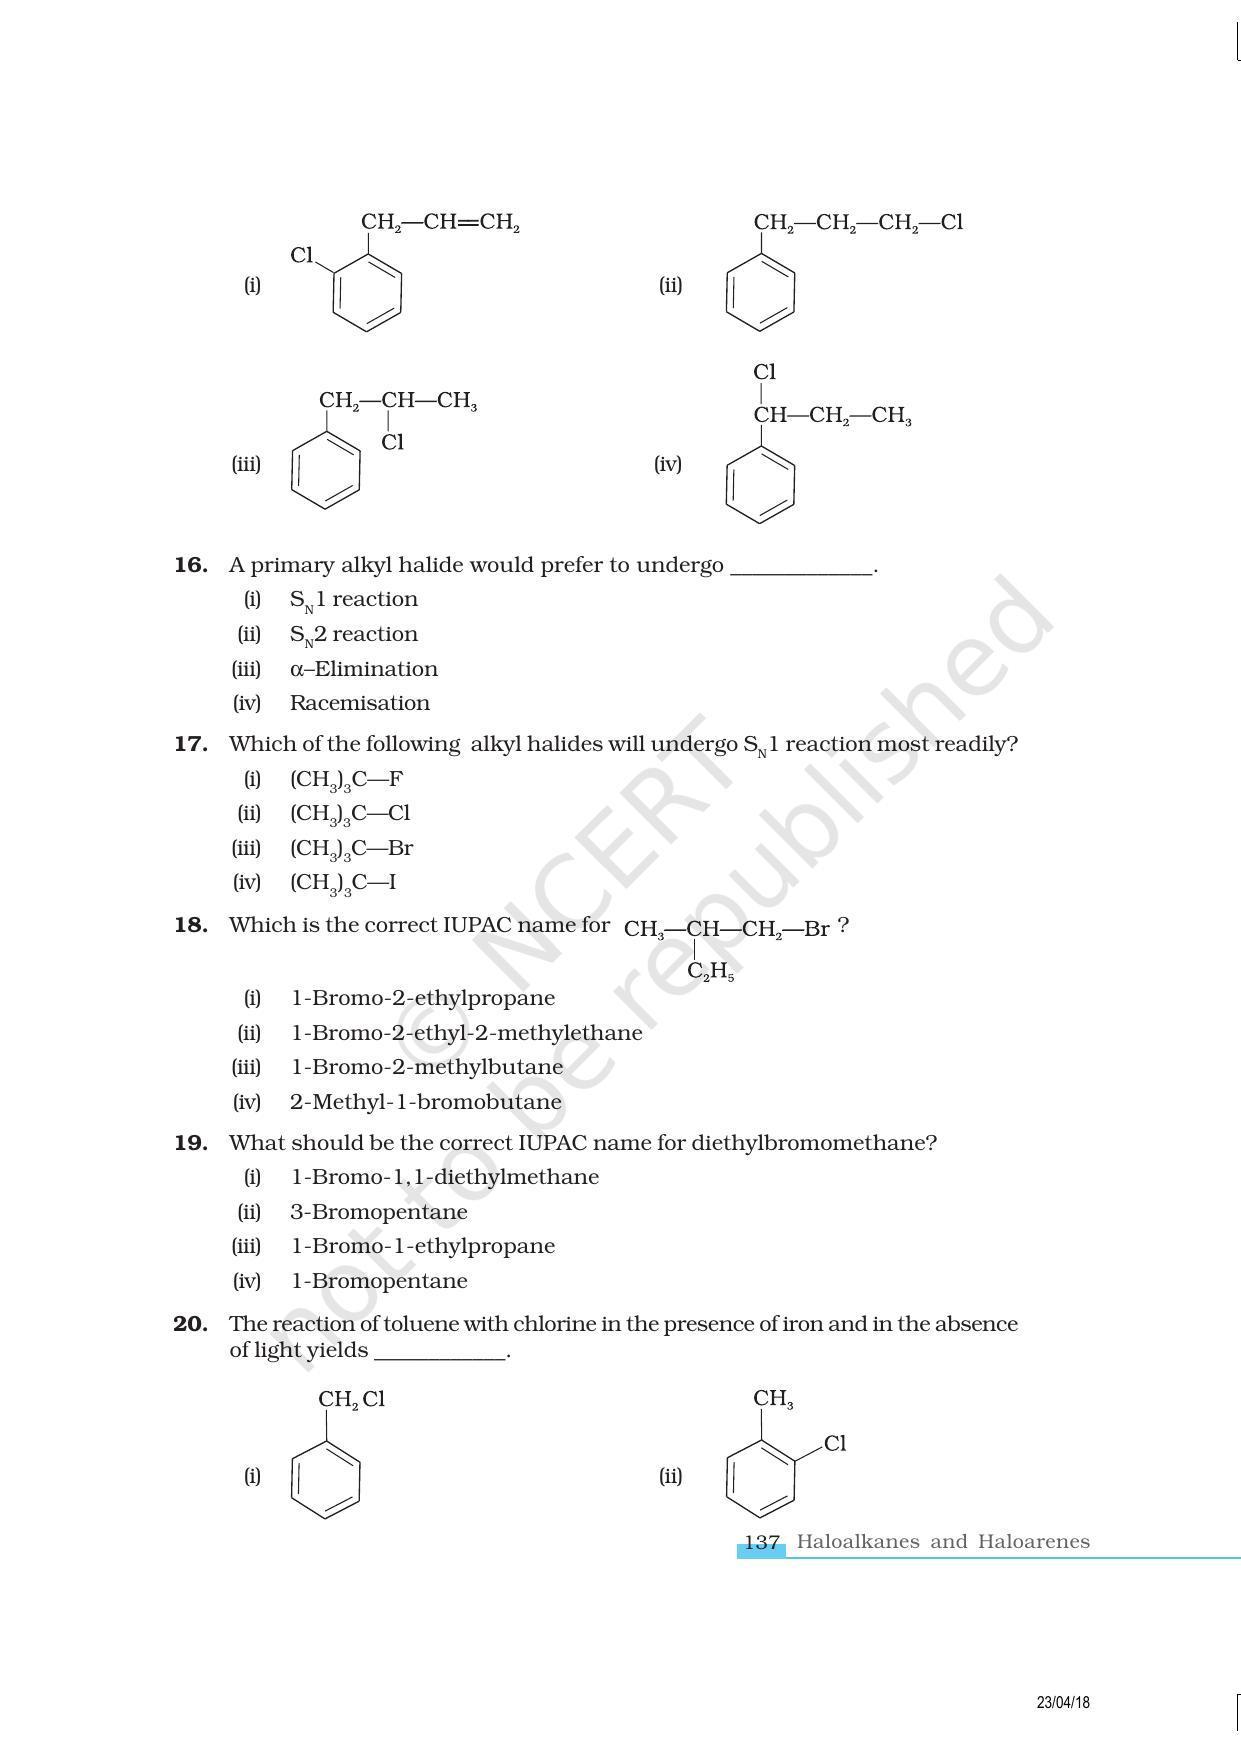 NCERT Exemplar Book for Class 12 Chemistry: Chapter 10 Haloalkanes and Haloarenes - Page 5